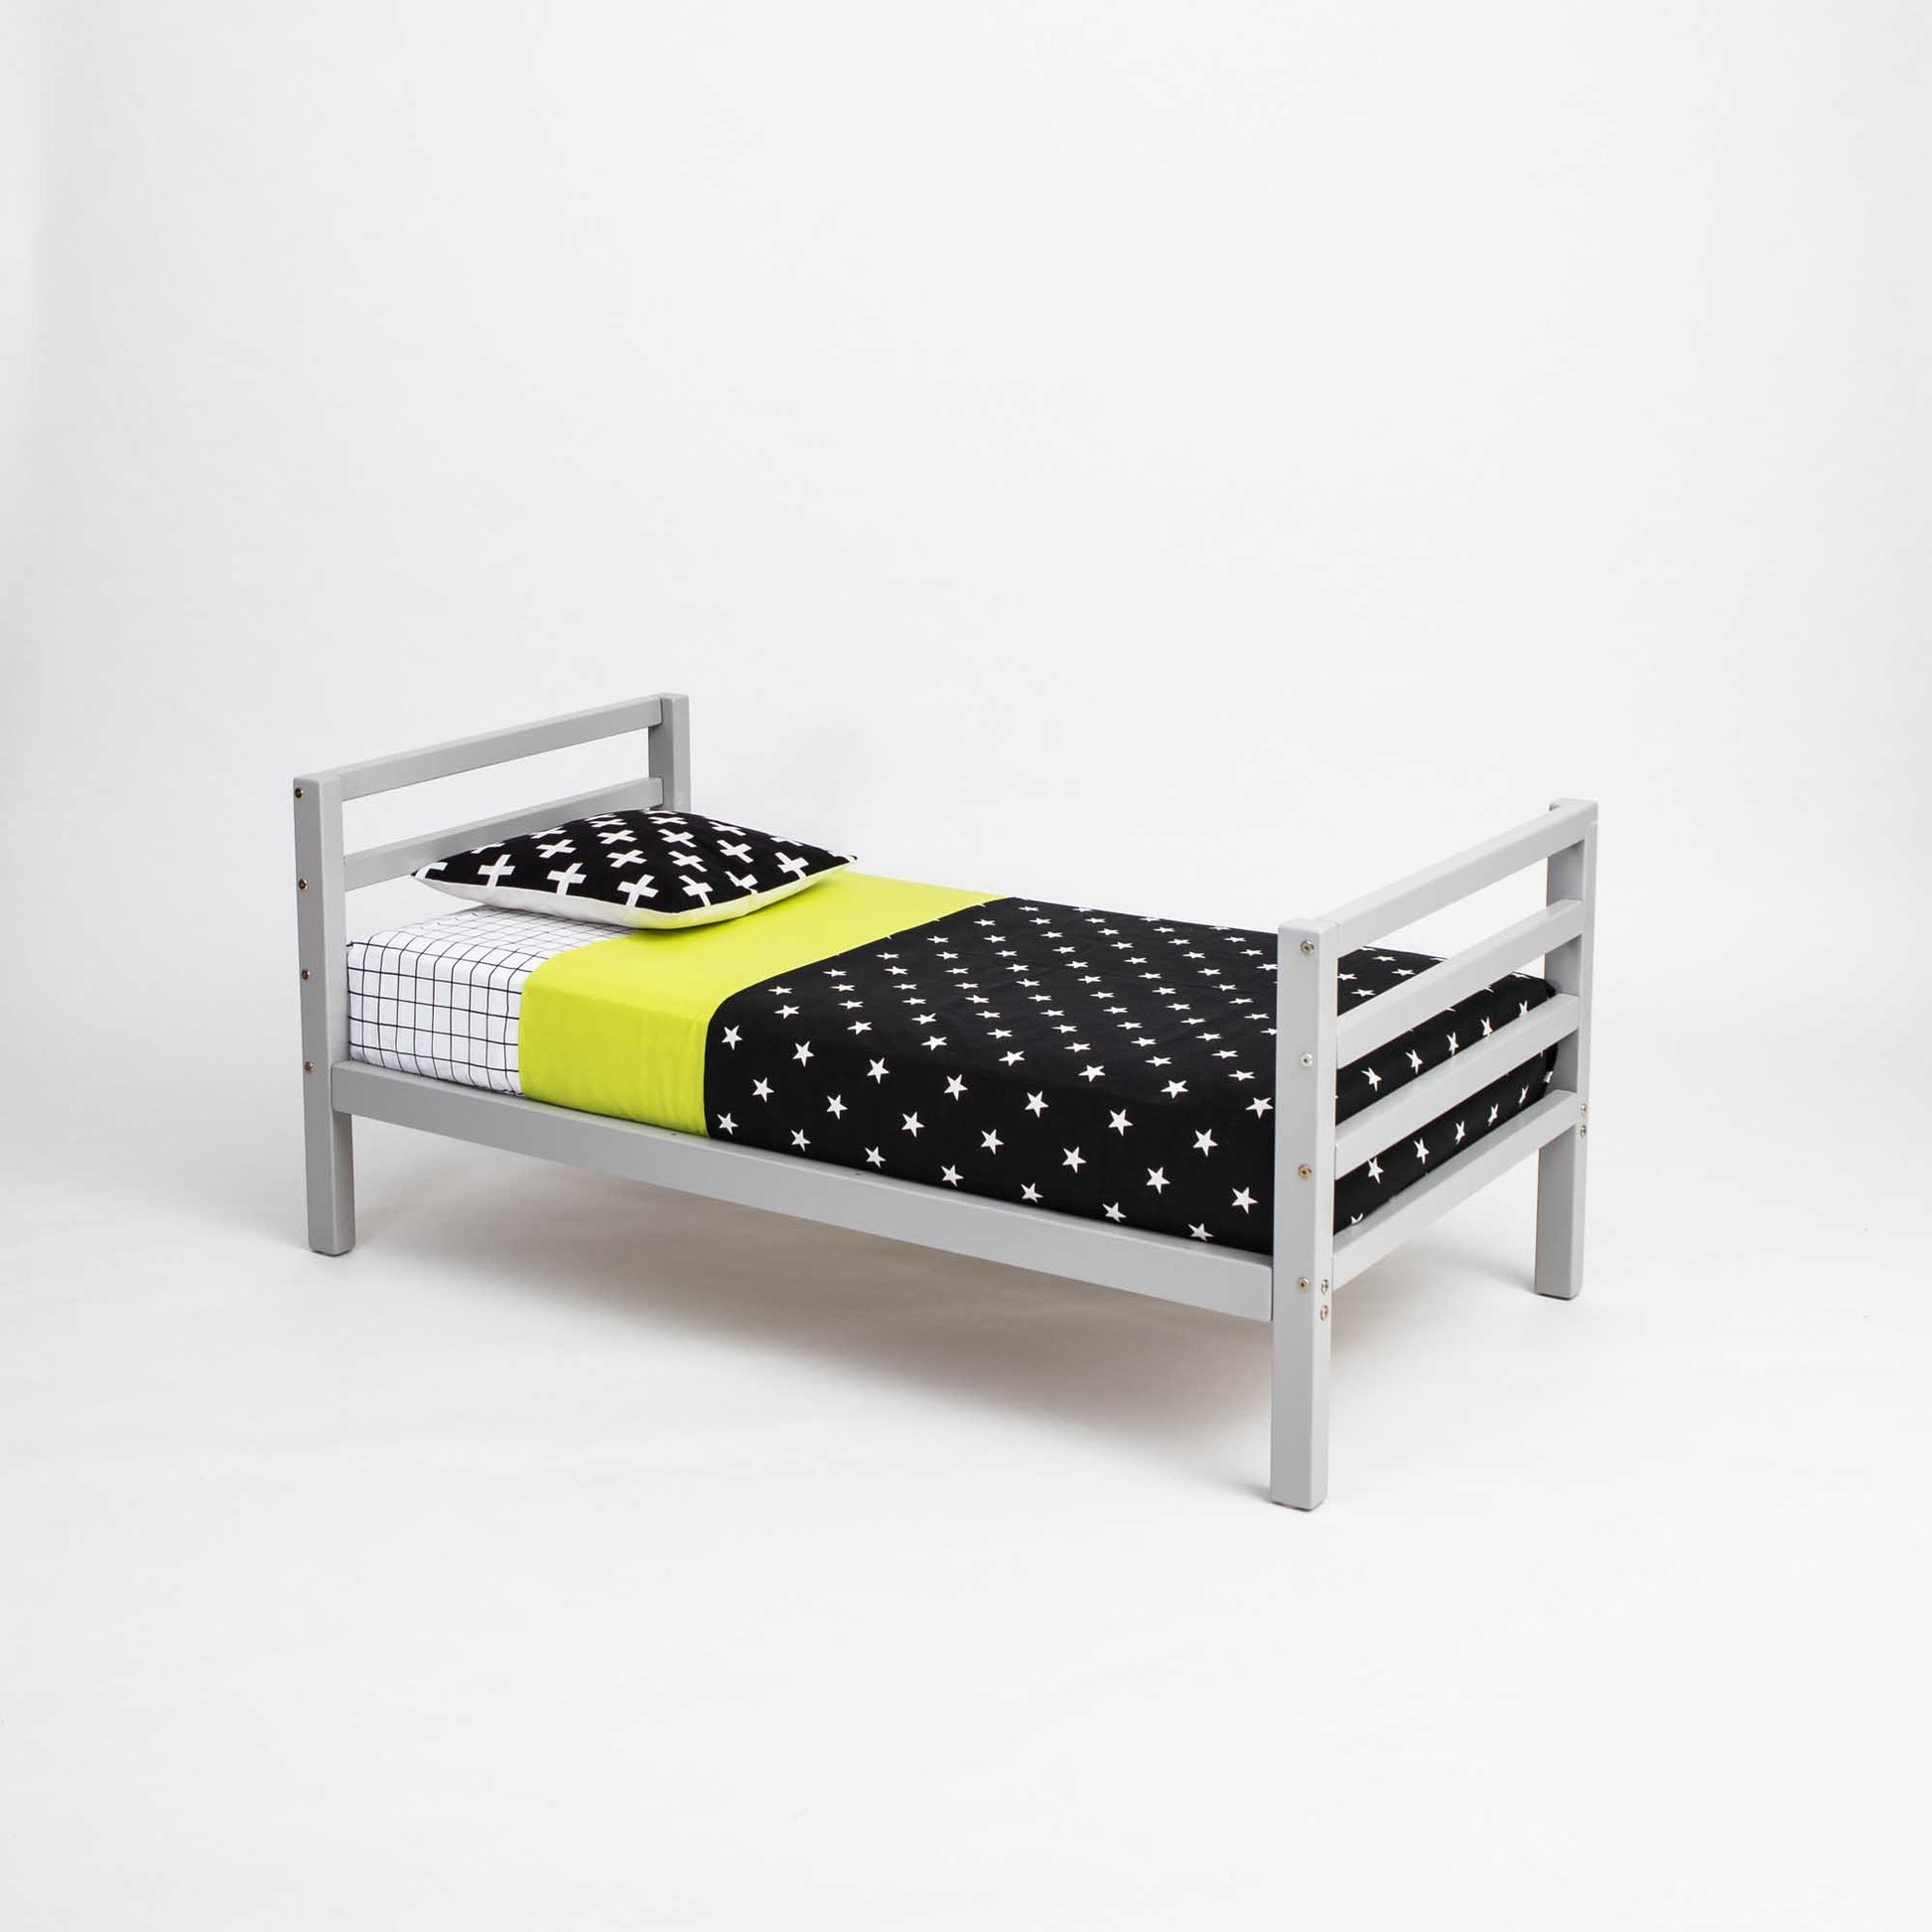 A Sweet Home From Wood kids' bed on legs with a horizontal rail headboard and footboard, with polka dot sheets and a sturdy grey frame.